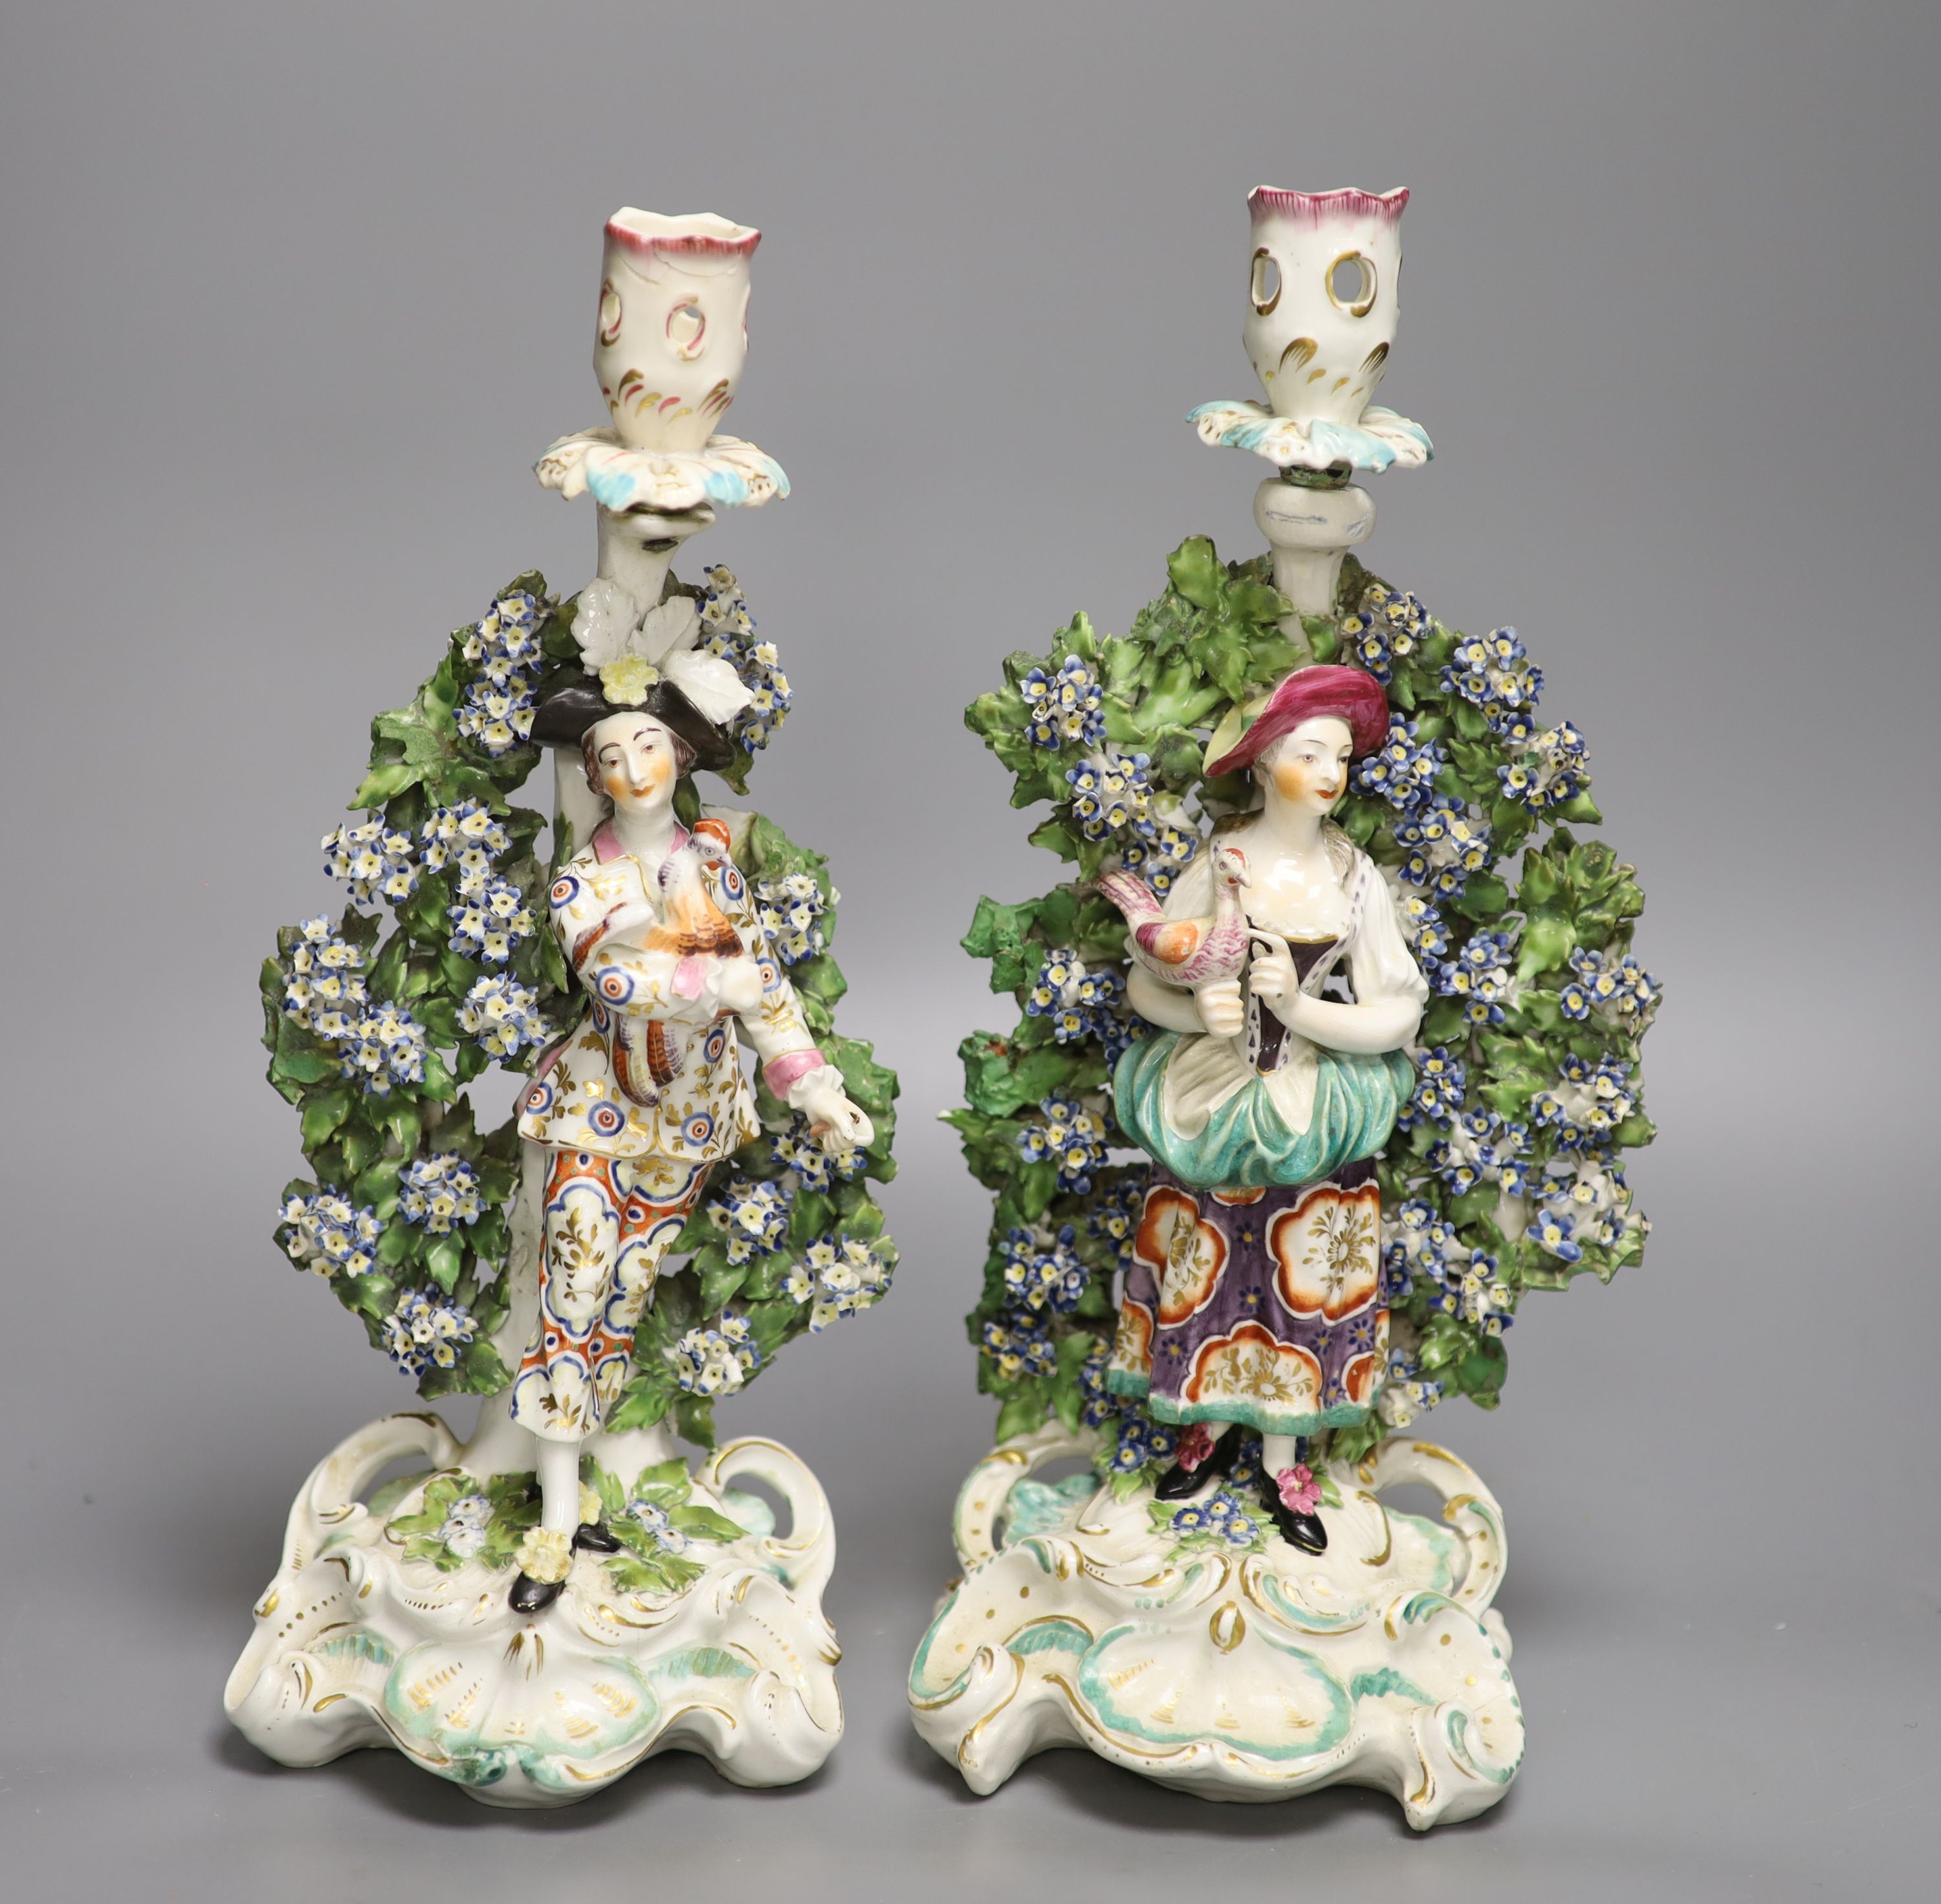 A pair of Derby candlestick figures of the Italian Farmer and wife, he holding a rooster, and her a chicken standing on a rococo scroll